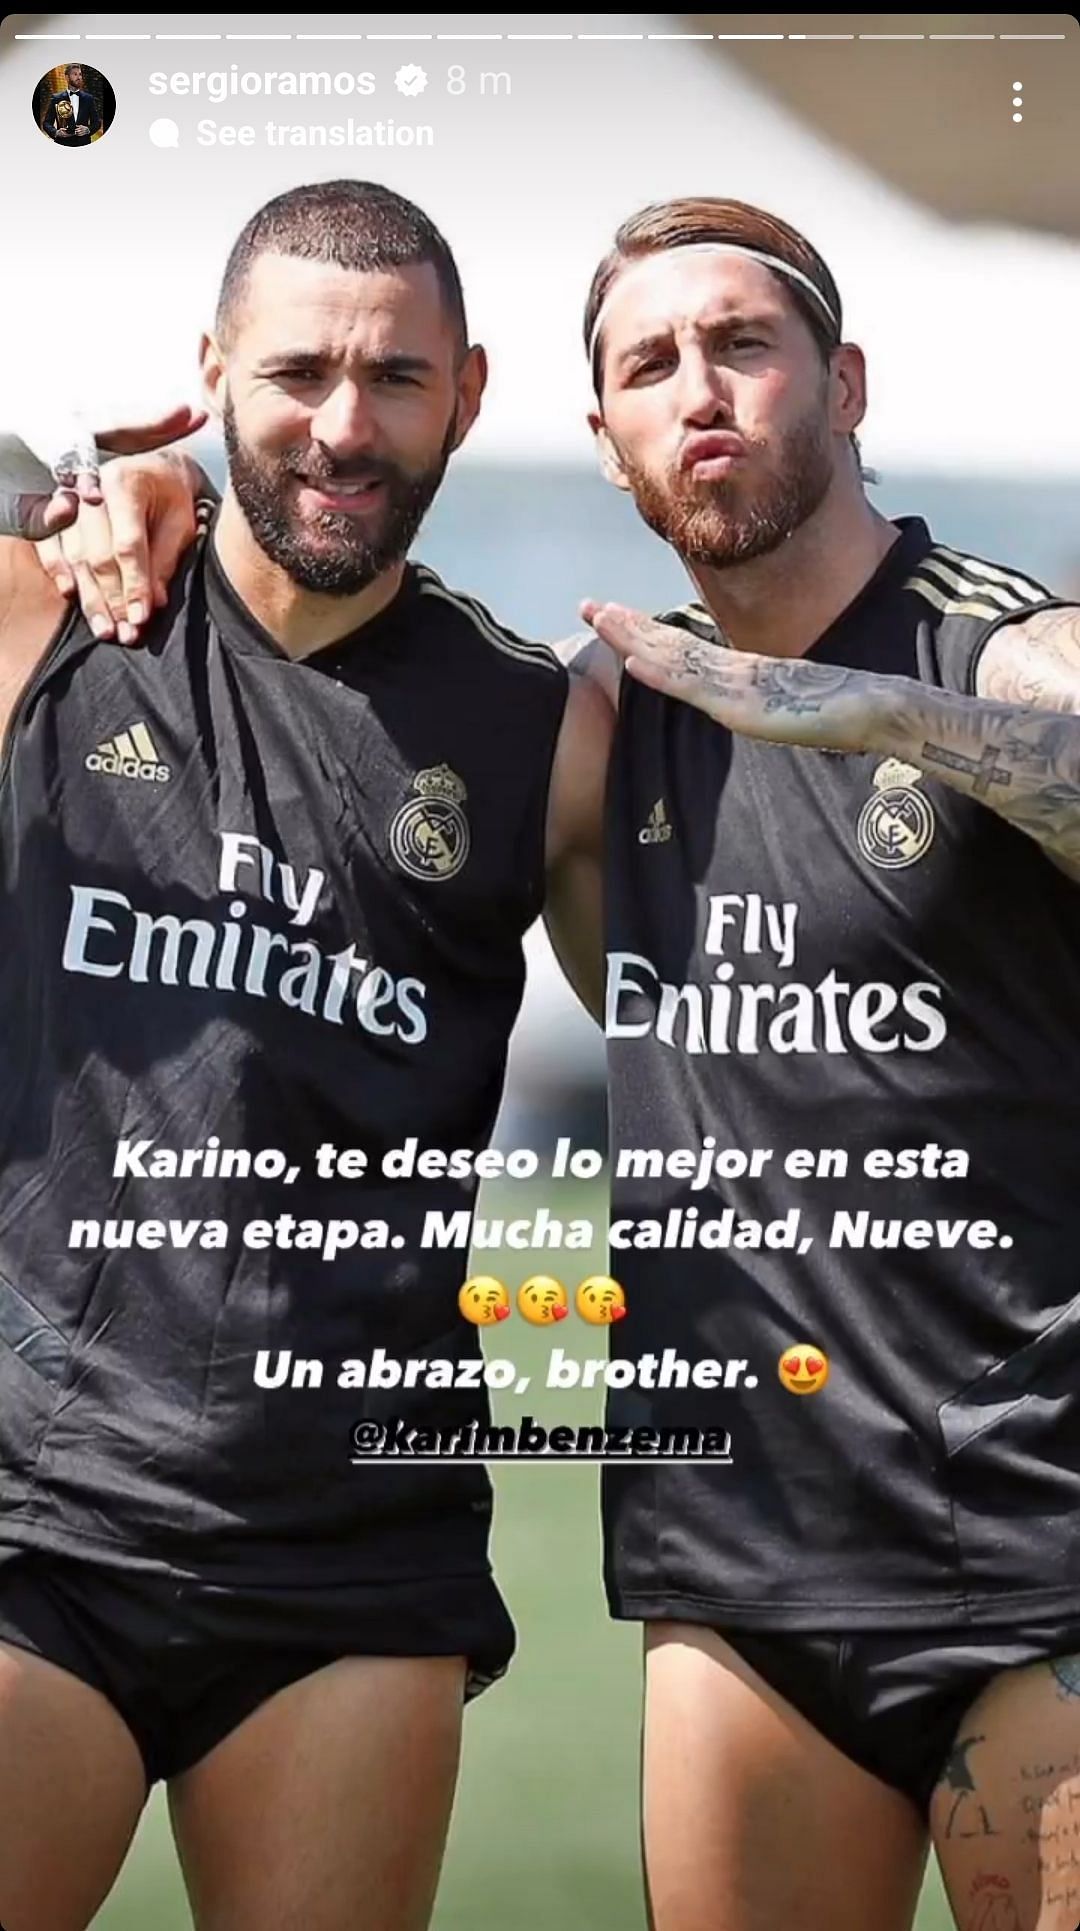 Real Madrid legend Sergio Ramos&#039; message for the departing Karim Benzema